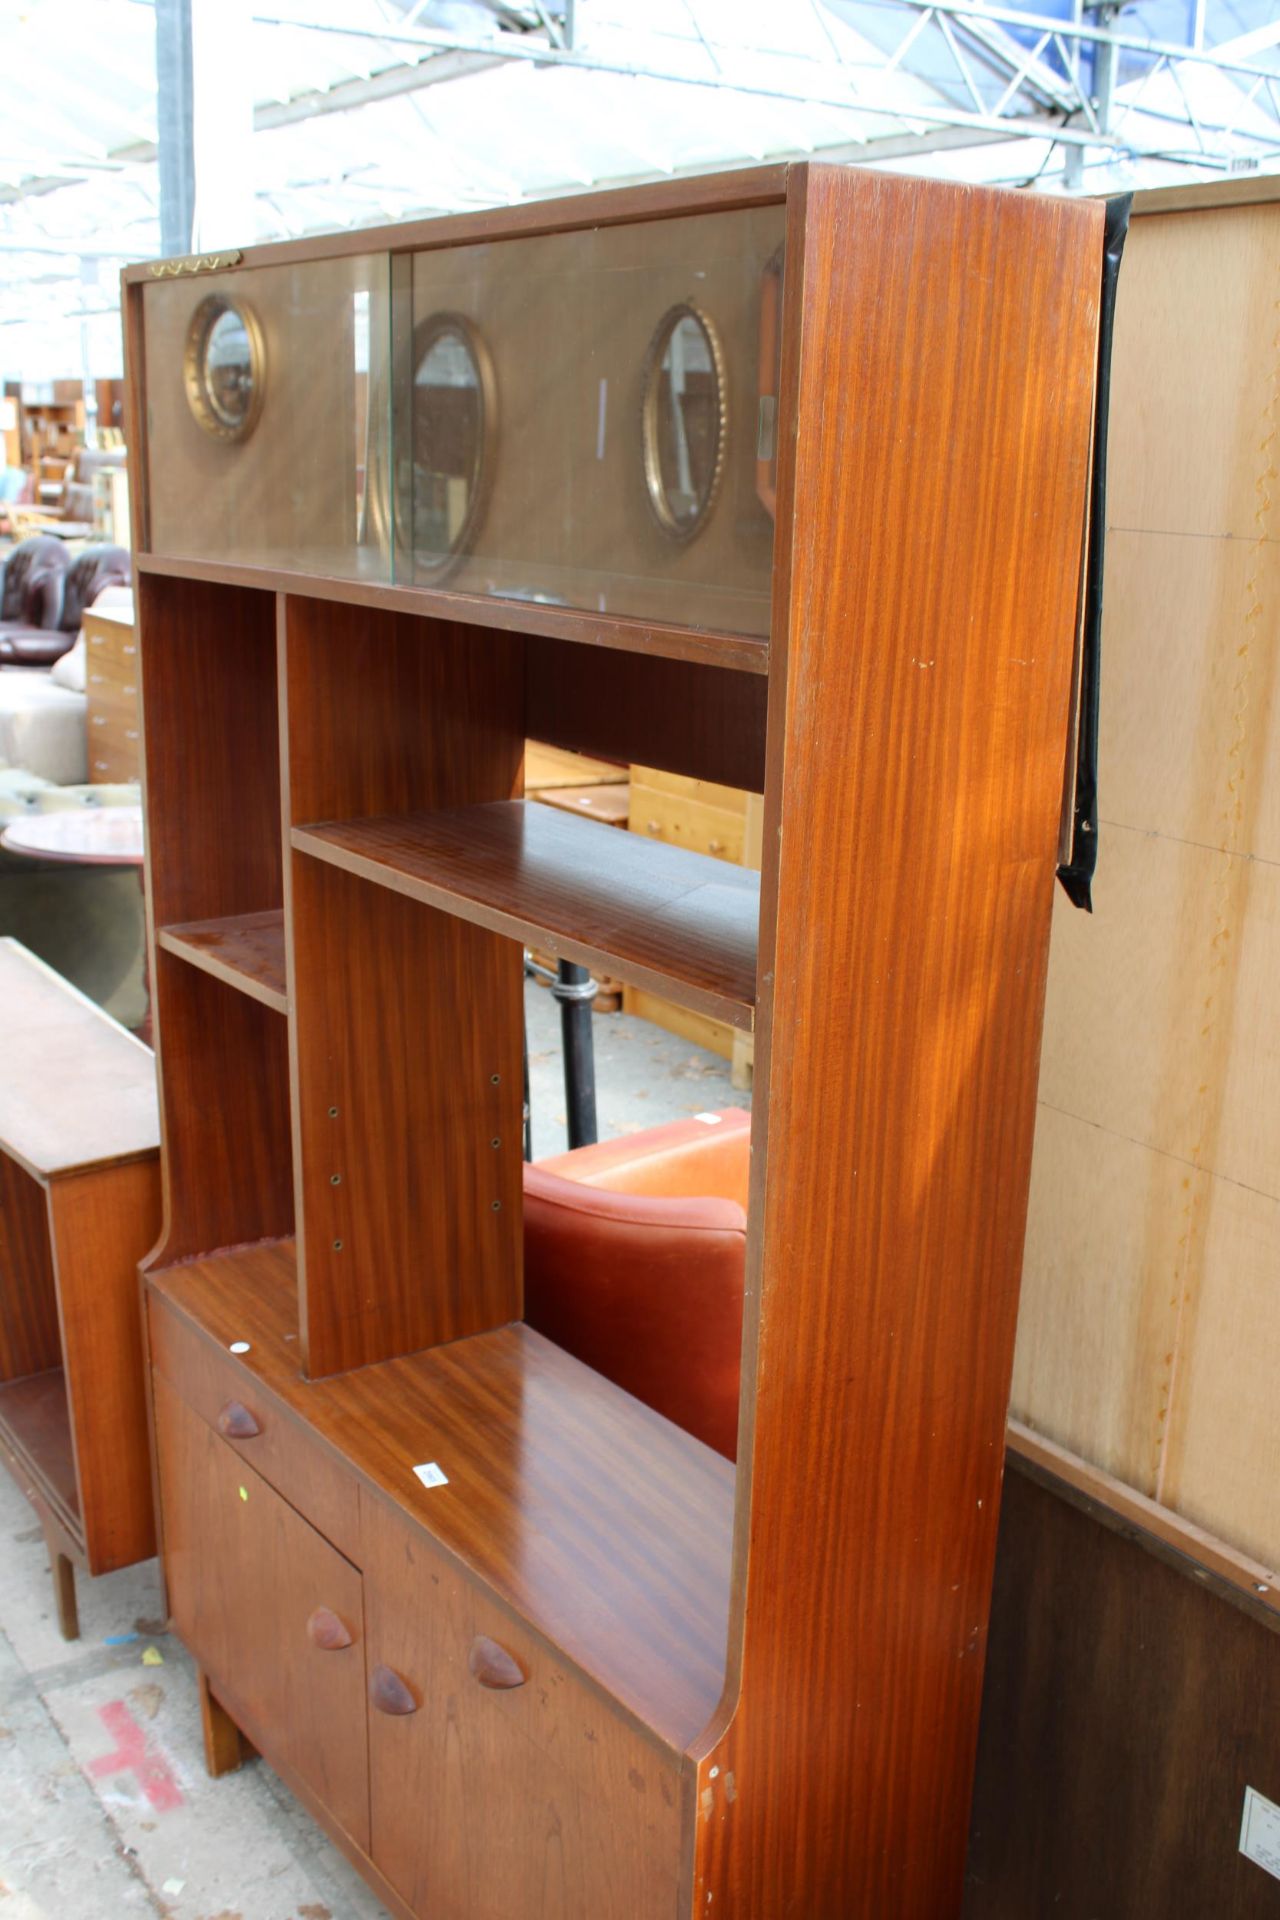 A RETRO TEAK OPEN UNTS BY STONEHILL (STATEROOM) ENCLOSING TWO GLASS SLIDING DOORS, TWO CUPBOARDS AND - Image 2 of 4